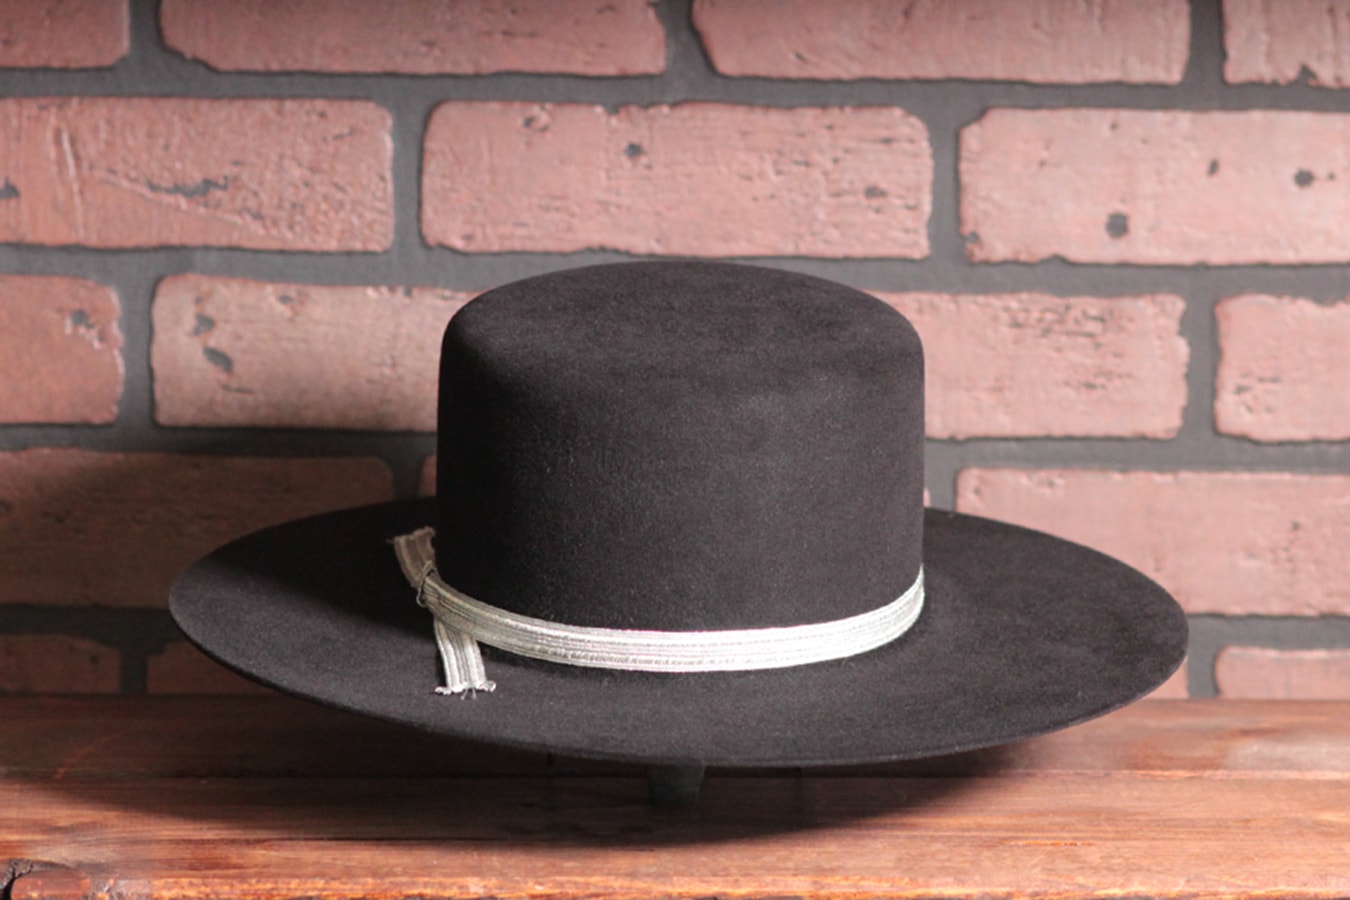 Inspired by the hat worn by Guy Williams as Zorro in Walt Disney’s TV 1957 series